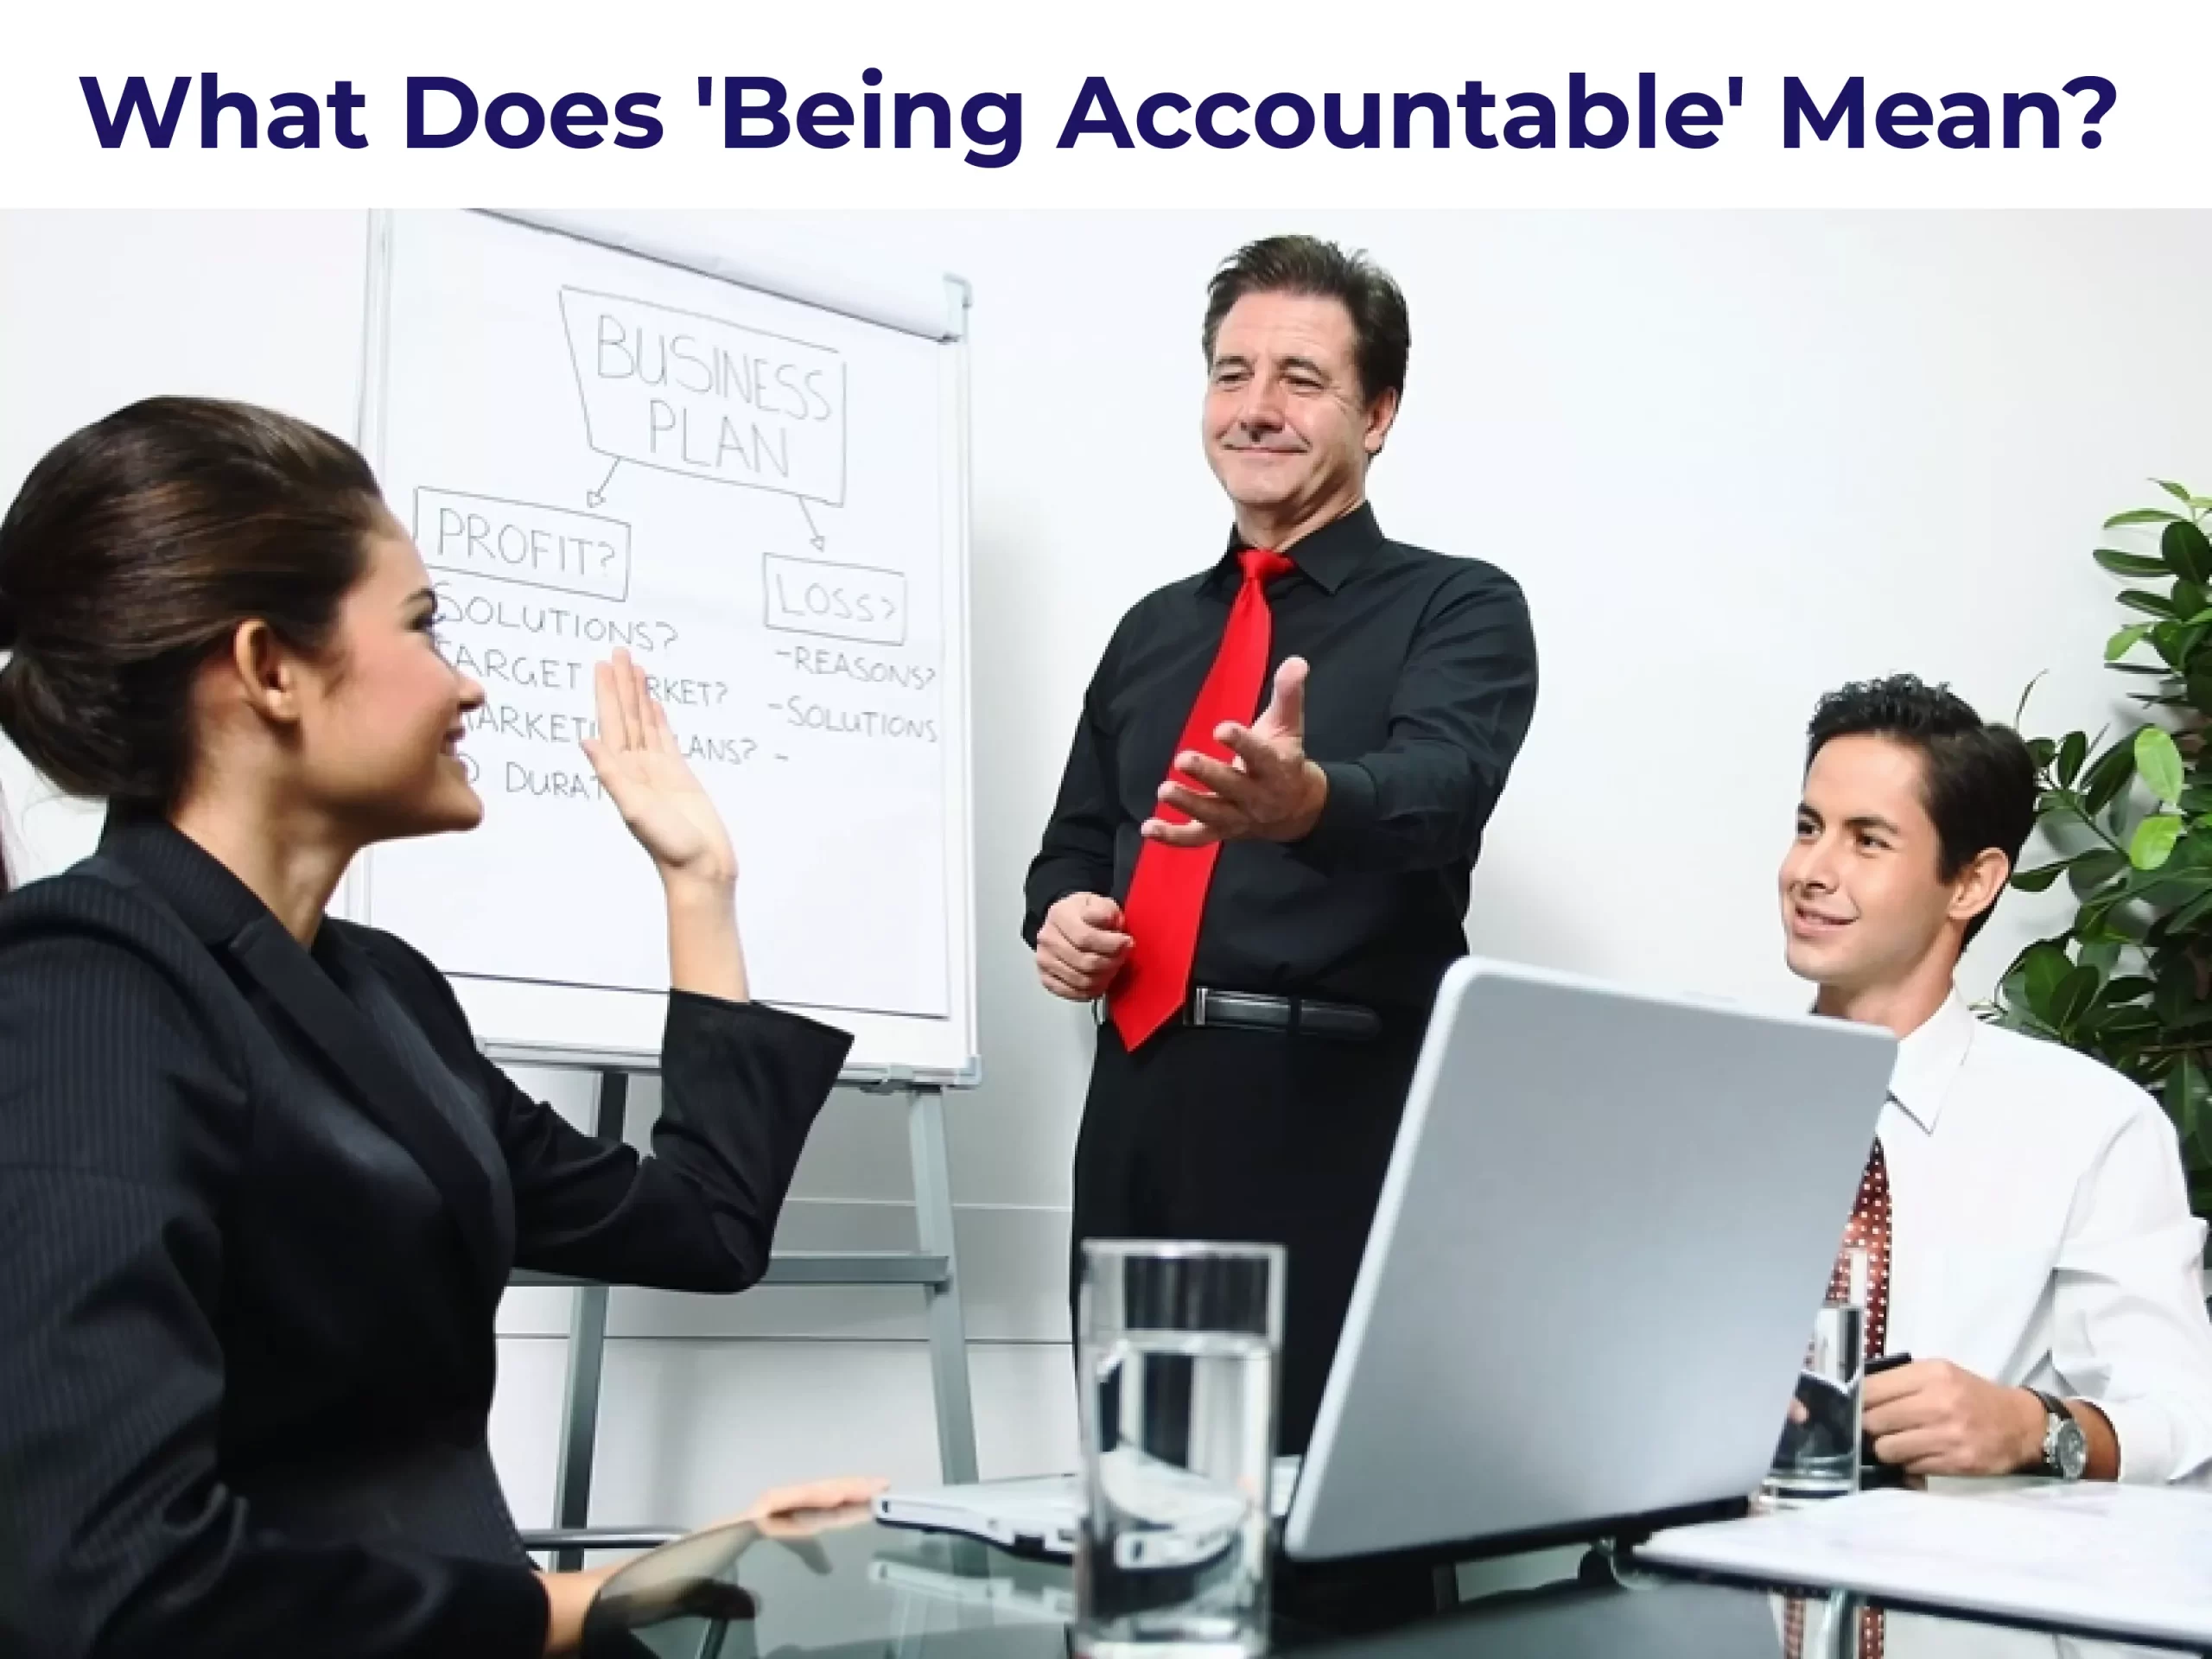 What Does 'Being Accountable' Mean?